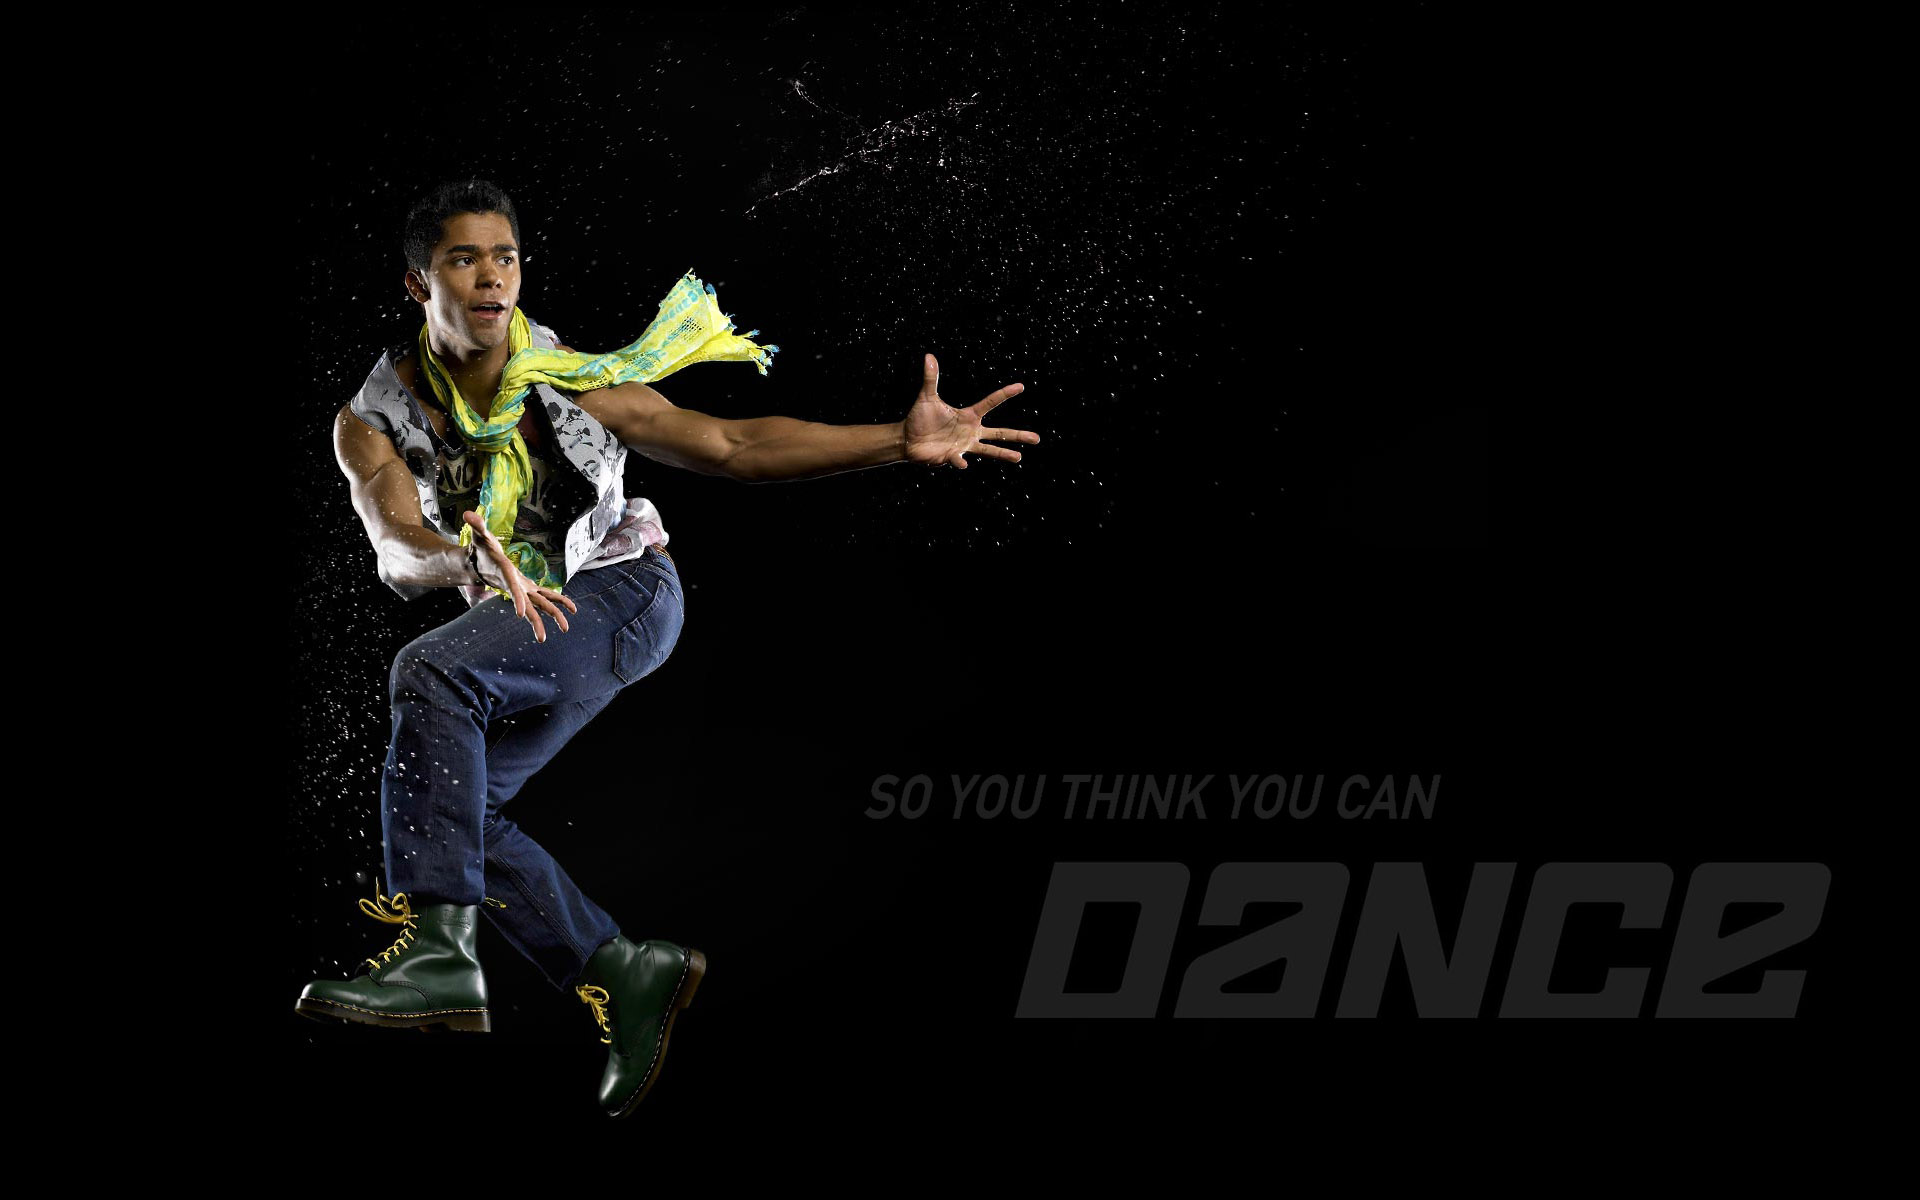 tv show, so you think you can dance, dance, dancer, dancing High Definition image